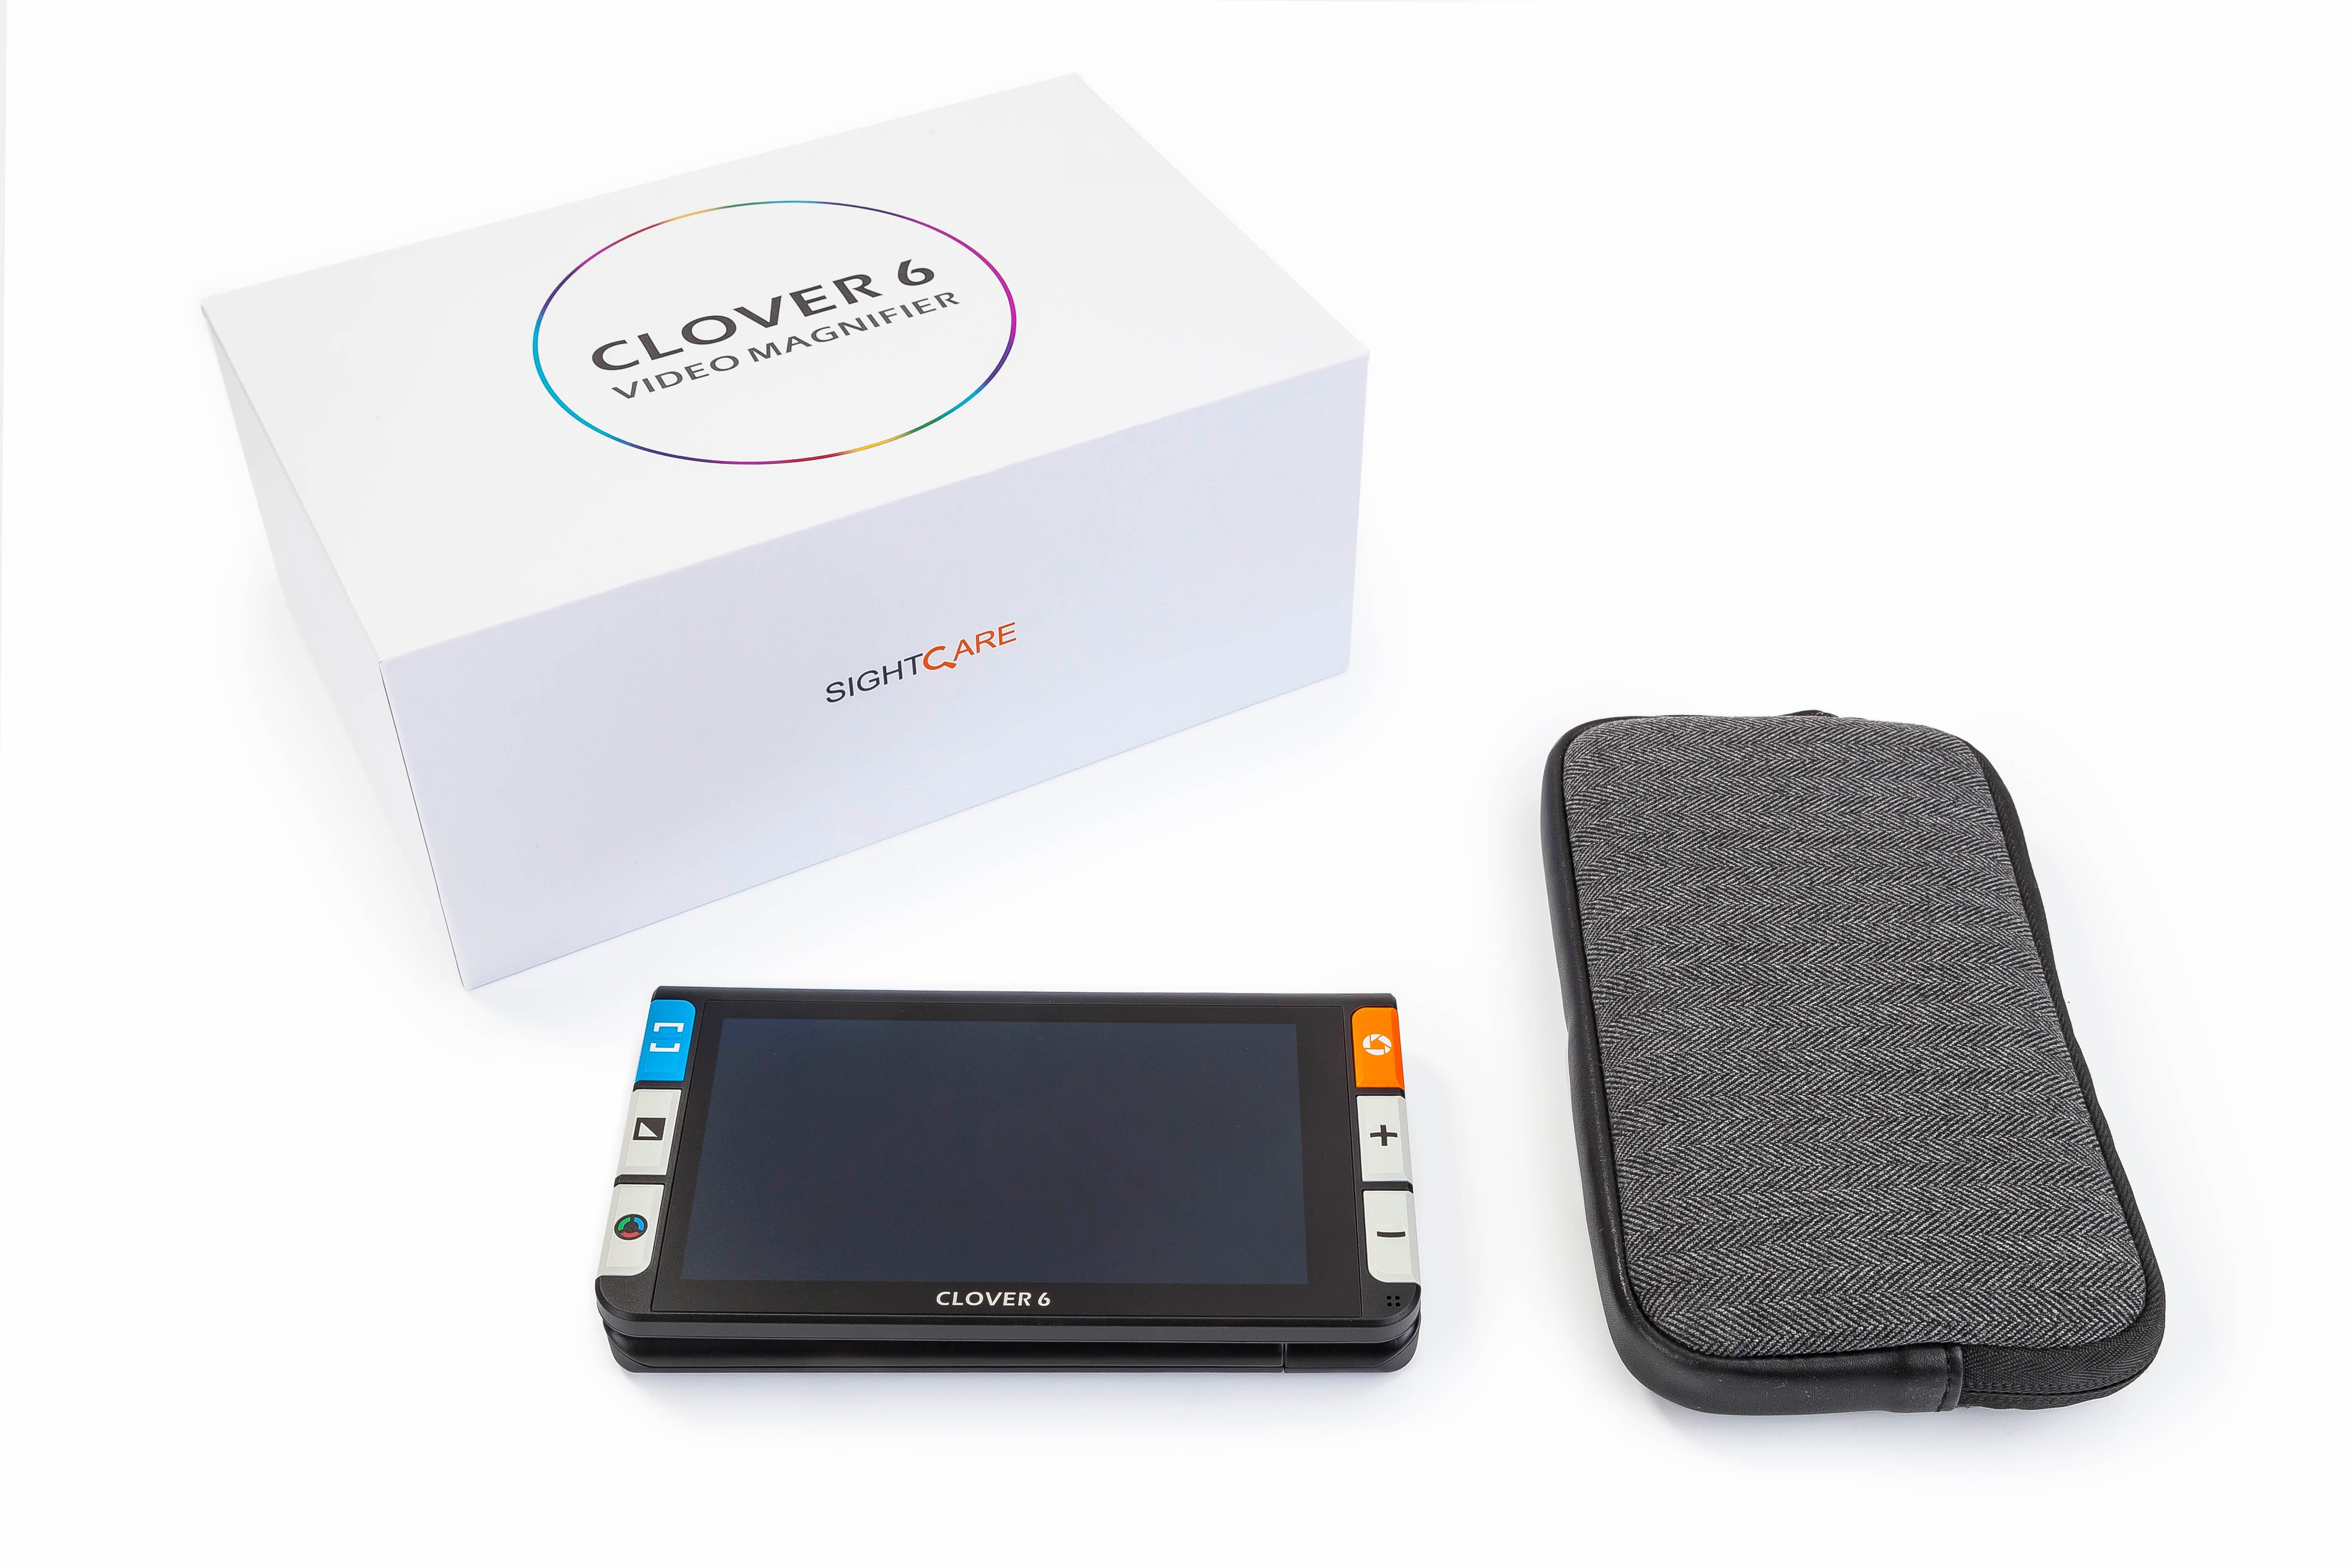 Clover 6 - 6 button with its case and presentation box